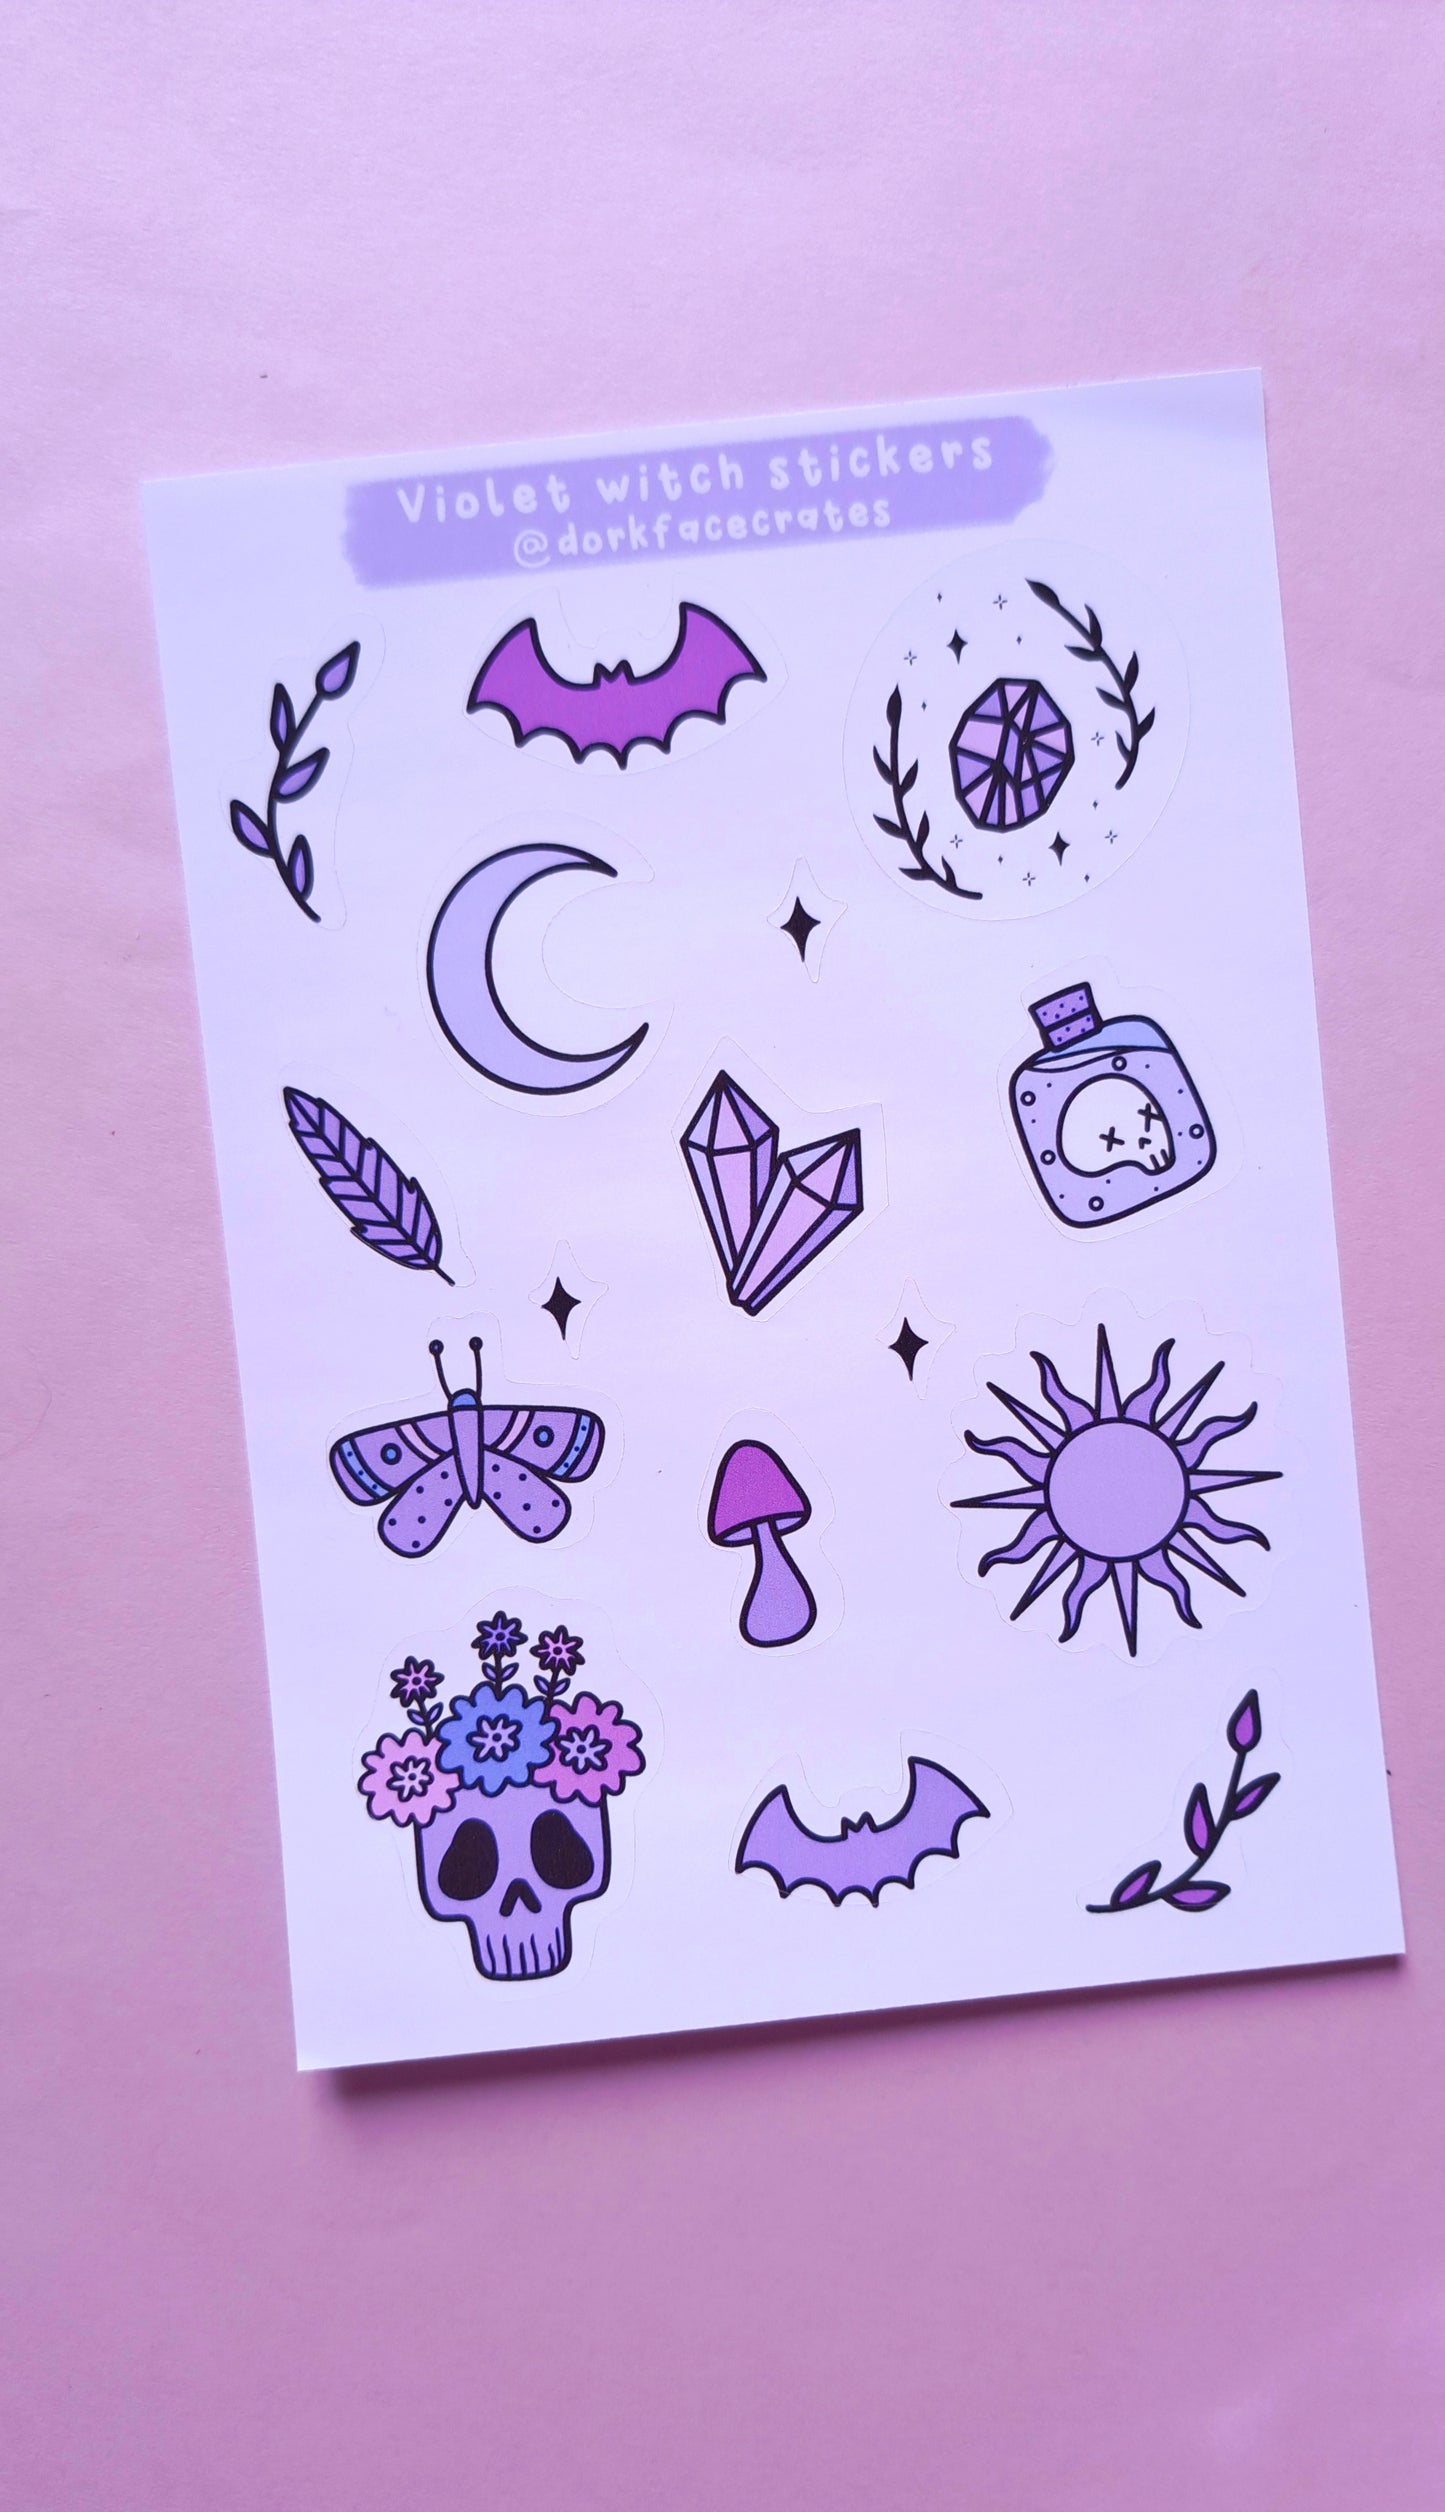 Violet Witch Stickers